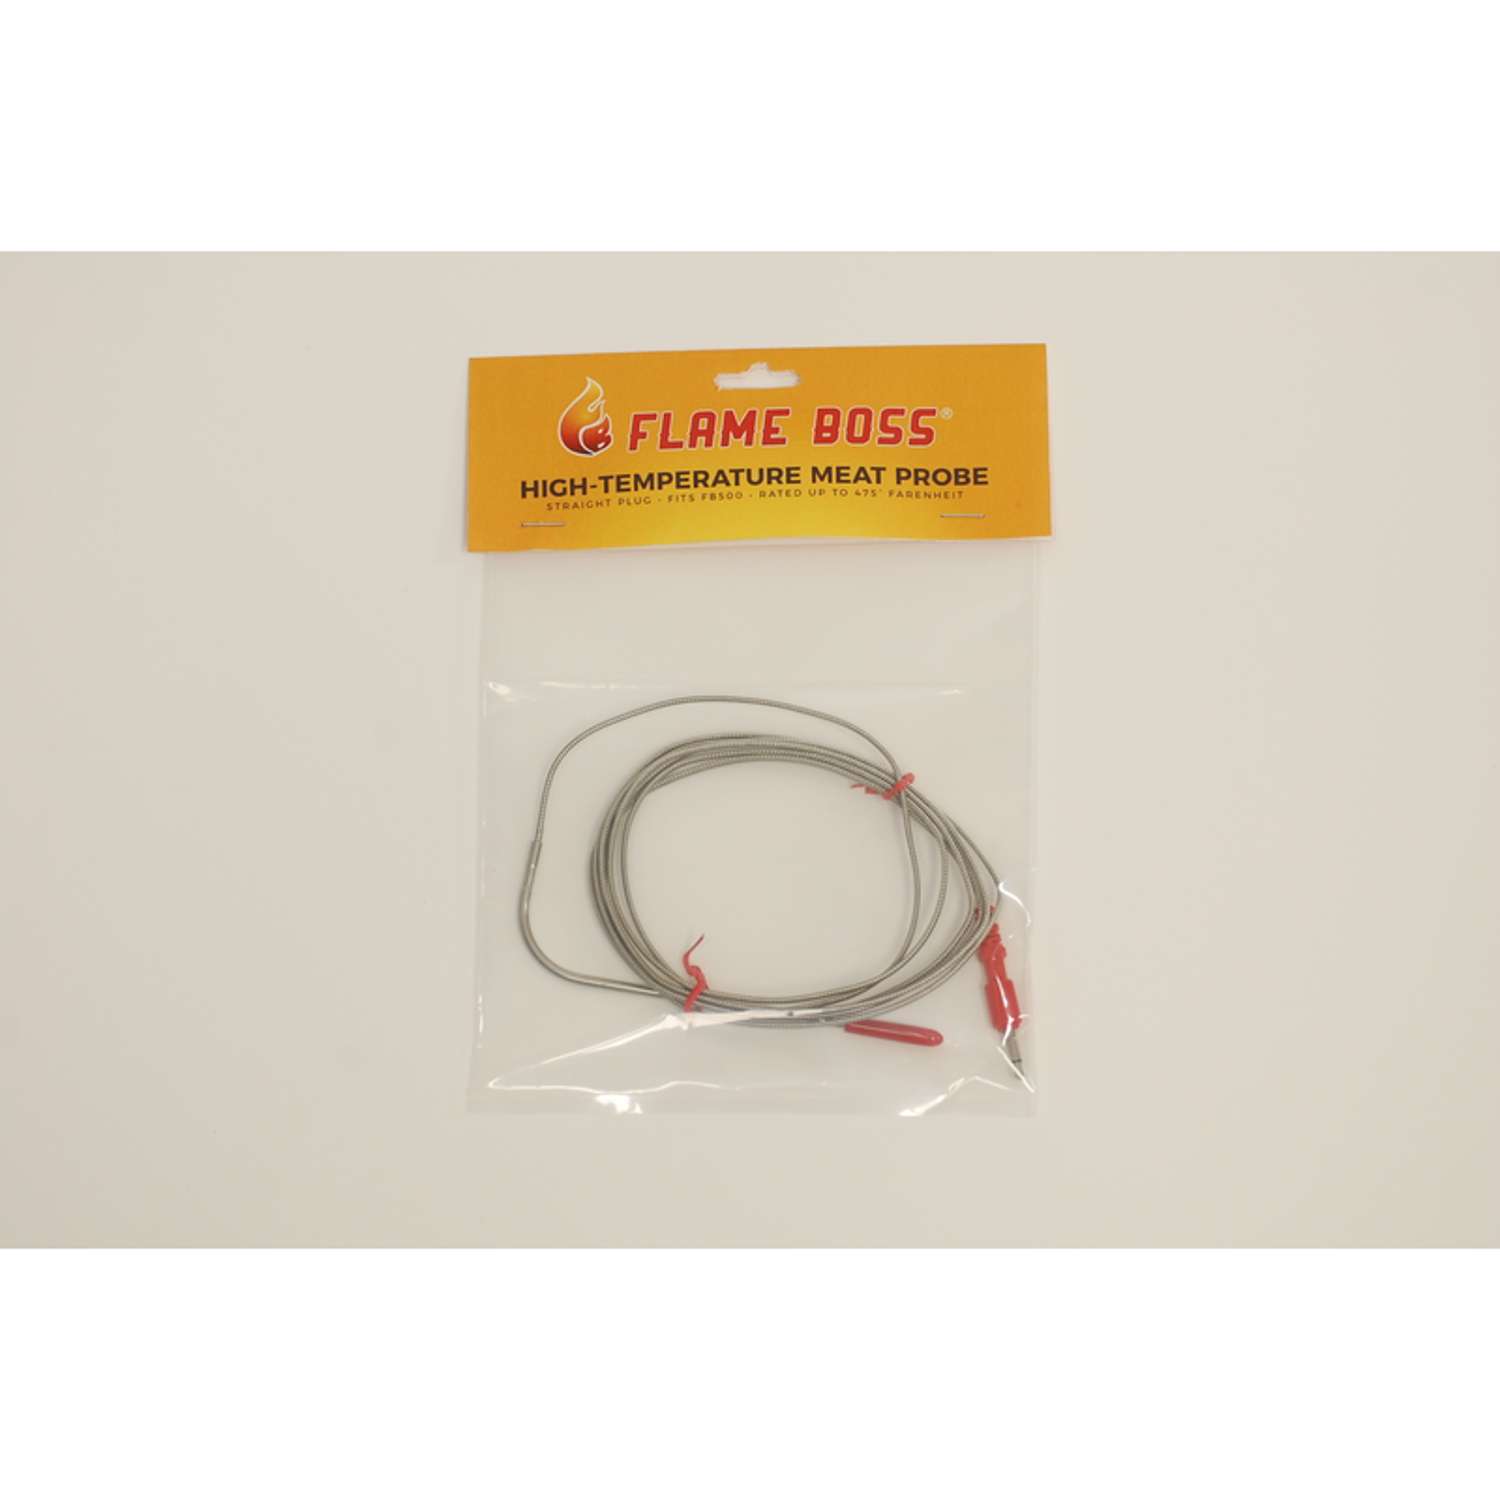 Flame Boss Probe Thermometer - Ace Hardware